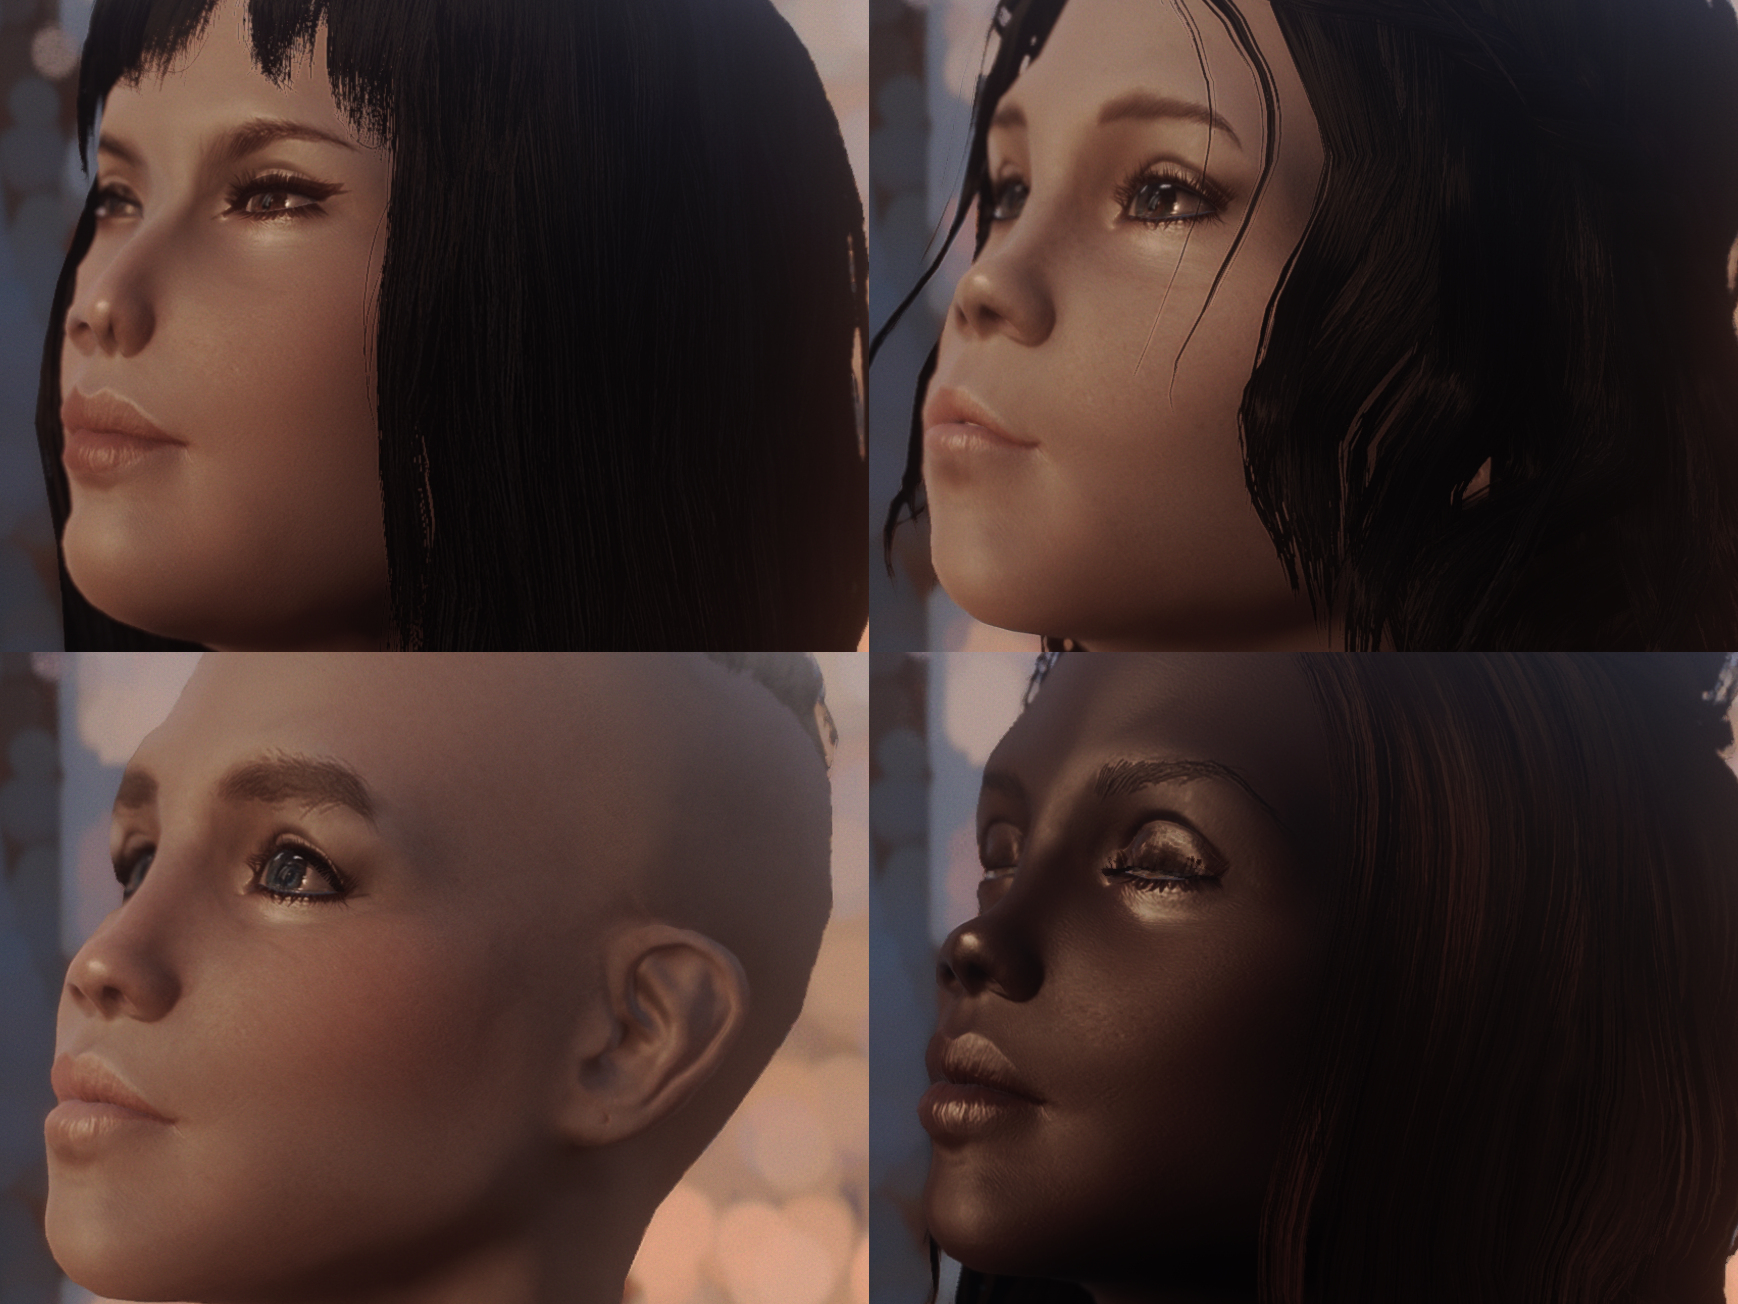 loverslab fallout 4 presets